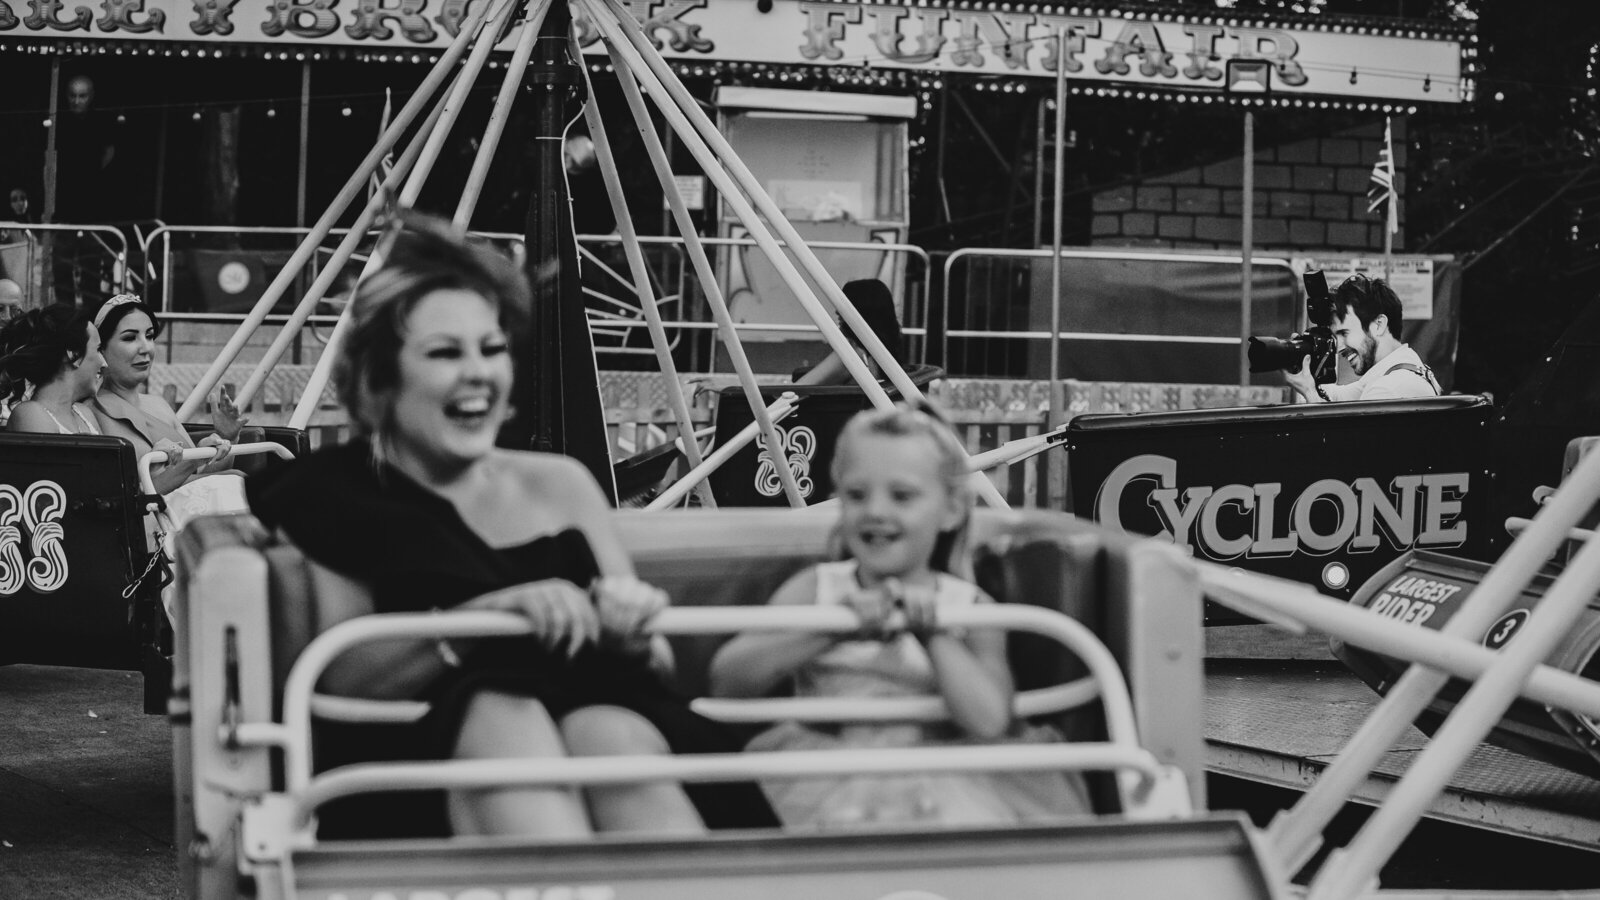 Tom Keenan the photographer on a fairground ride at Marleybrook House whilst taking photographs in black and white